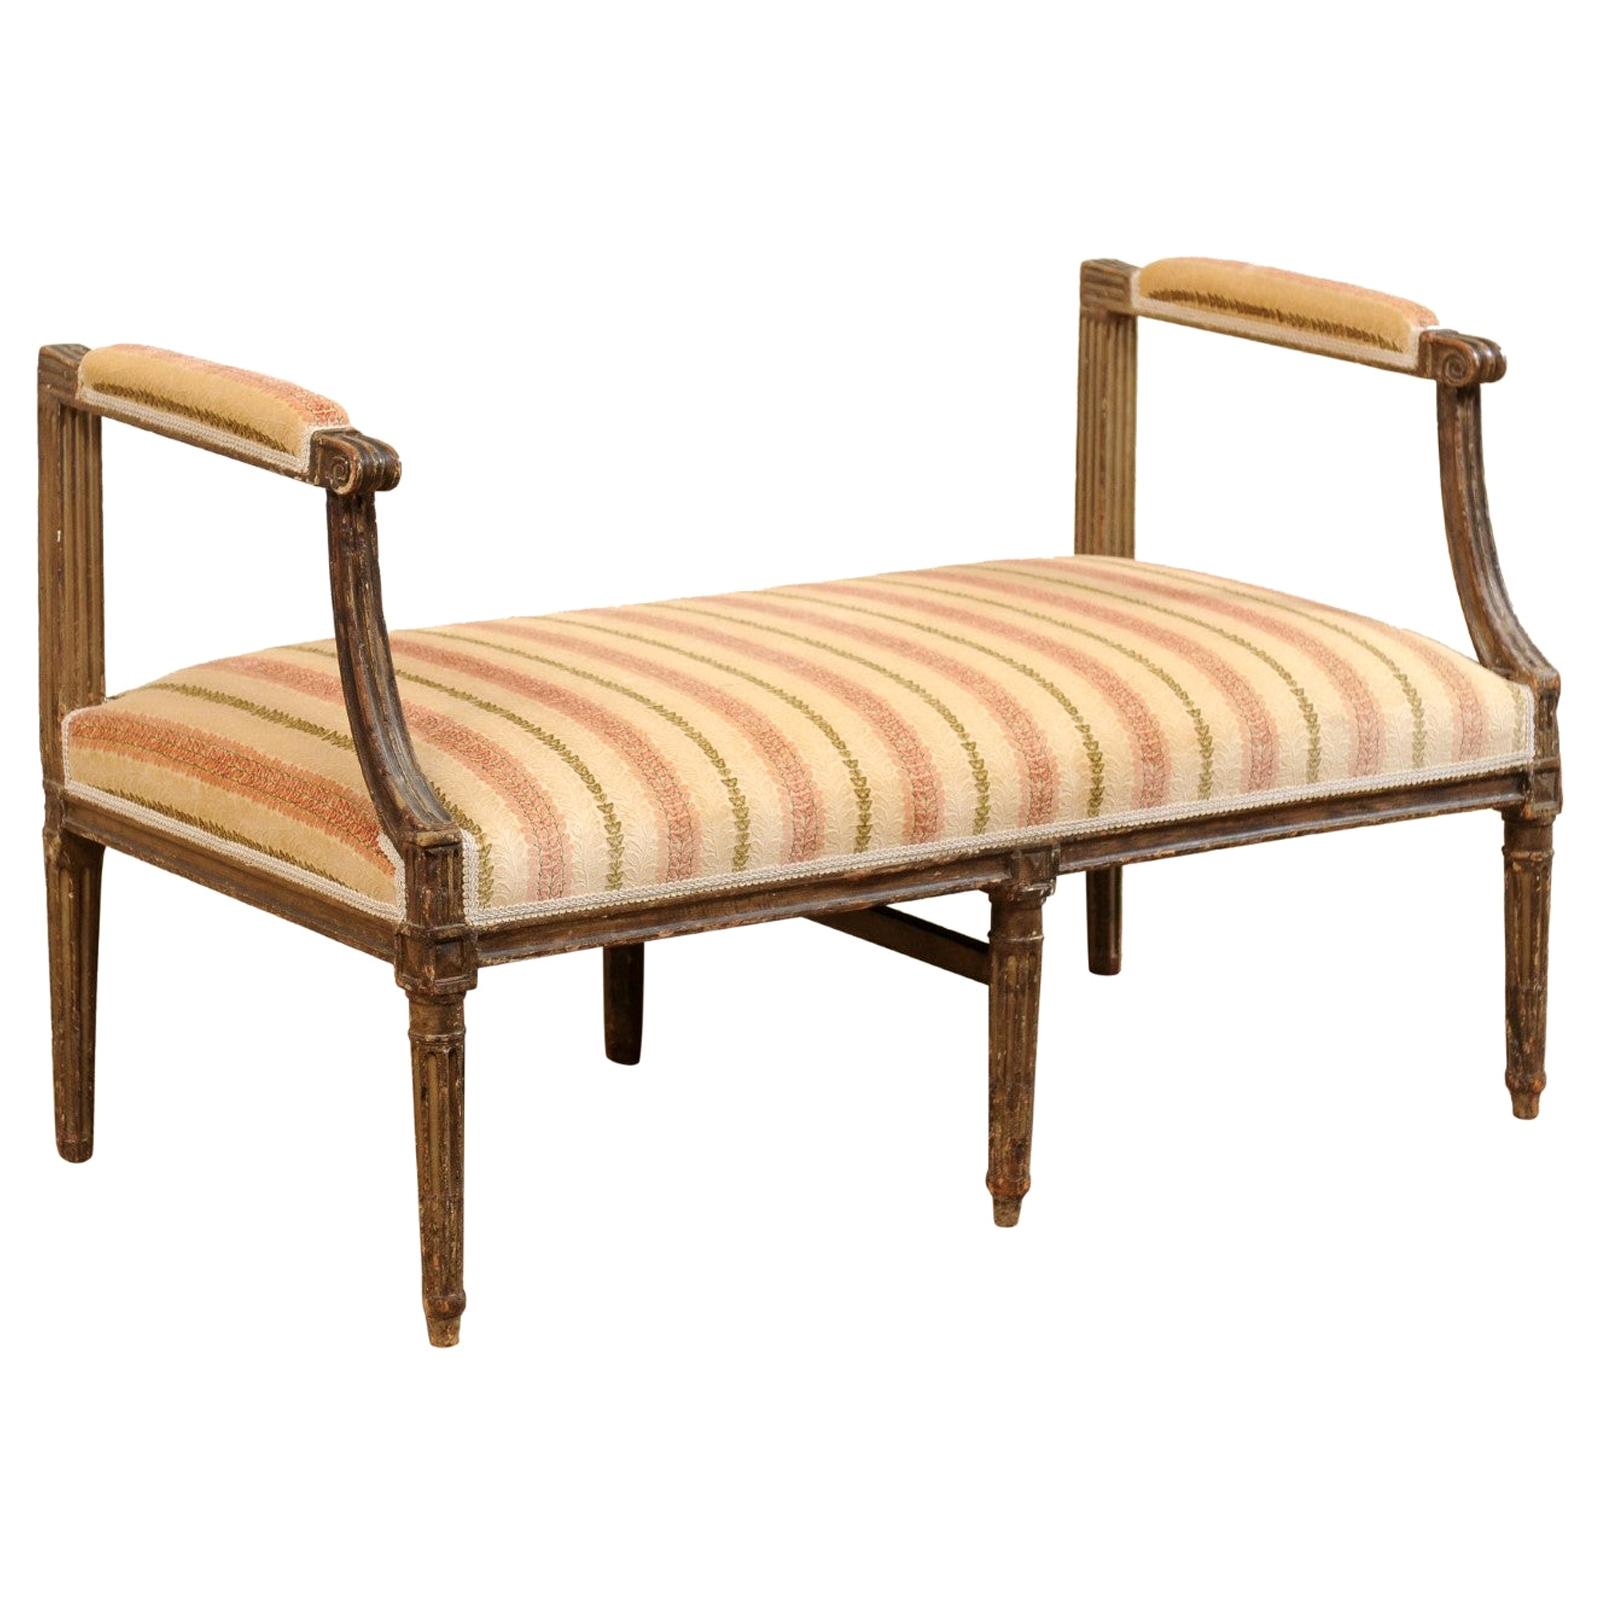 Louis XVI Window Bench with Arms, Flute Carved Accents and Upholstered Seat